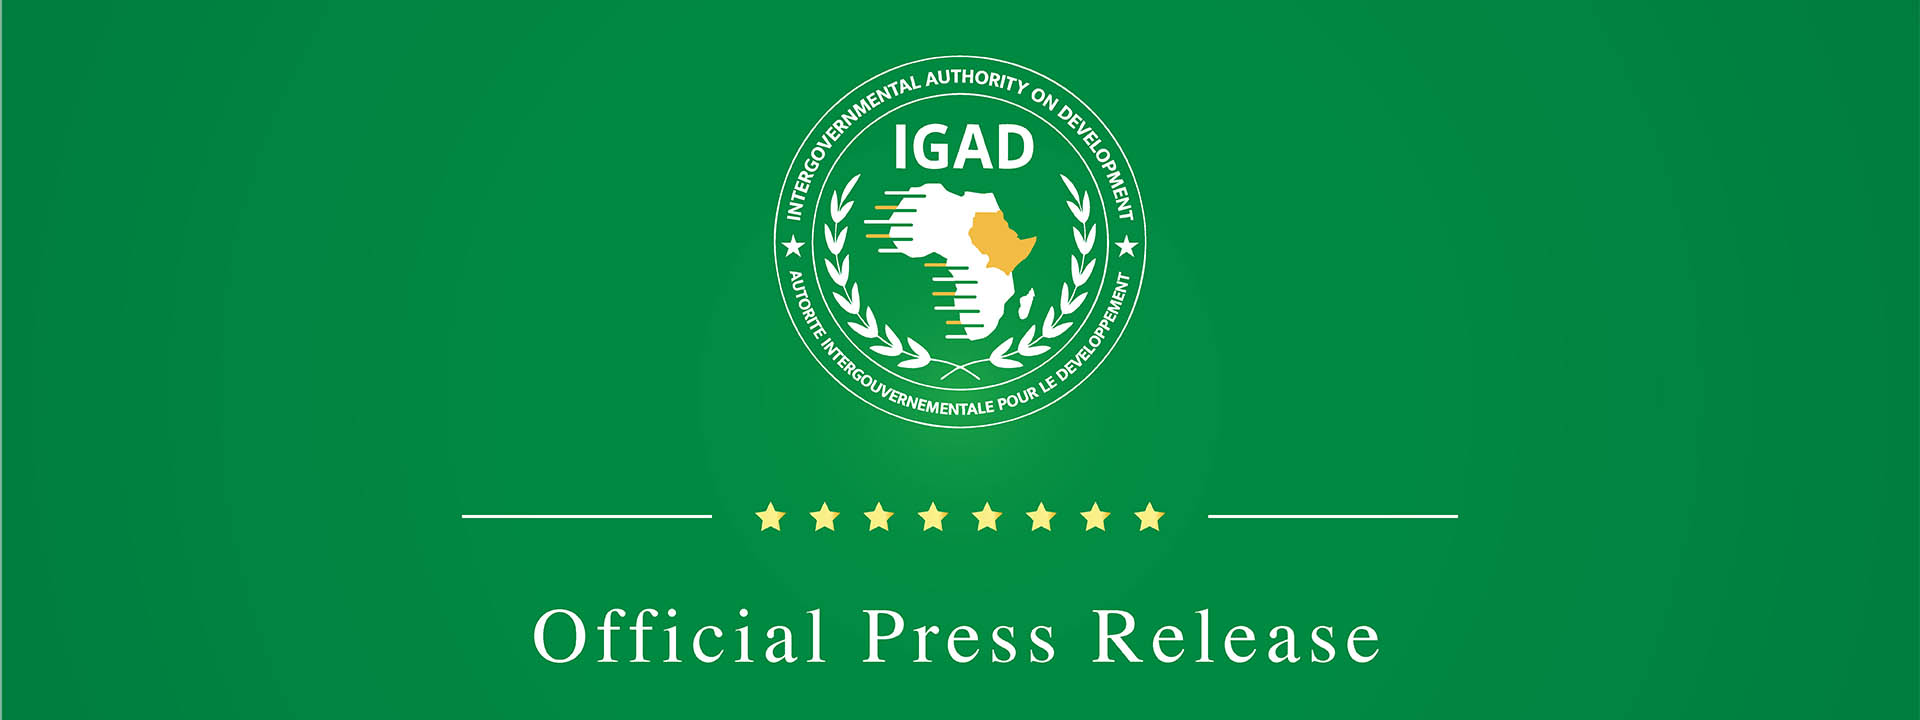 Statement of IGAD Executive Secretary on the Lifting of State of Emergency in Sudan